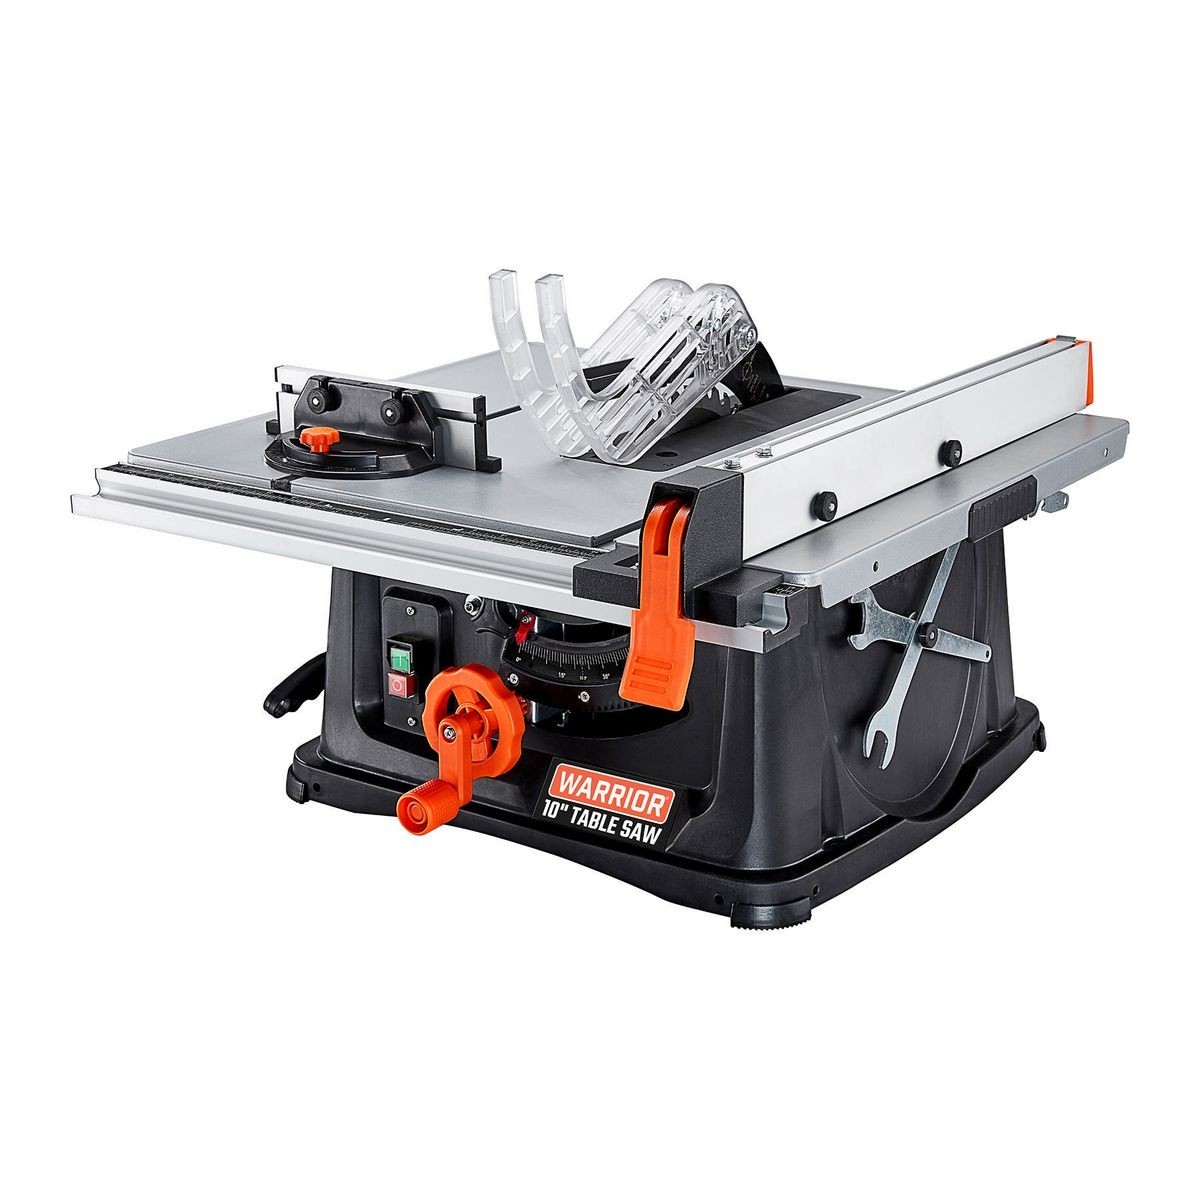 WARRIOR 10 In. 15 Amp Table Saw – Item 57342